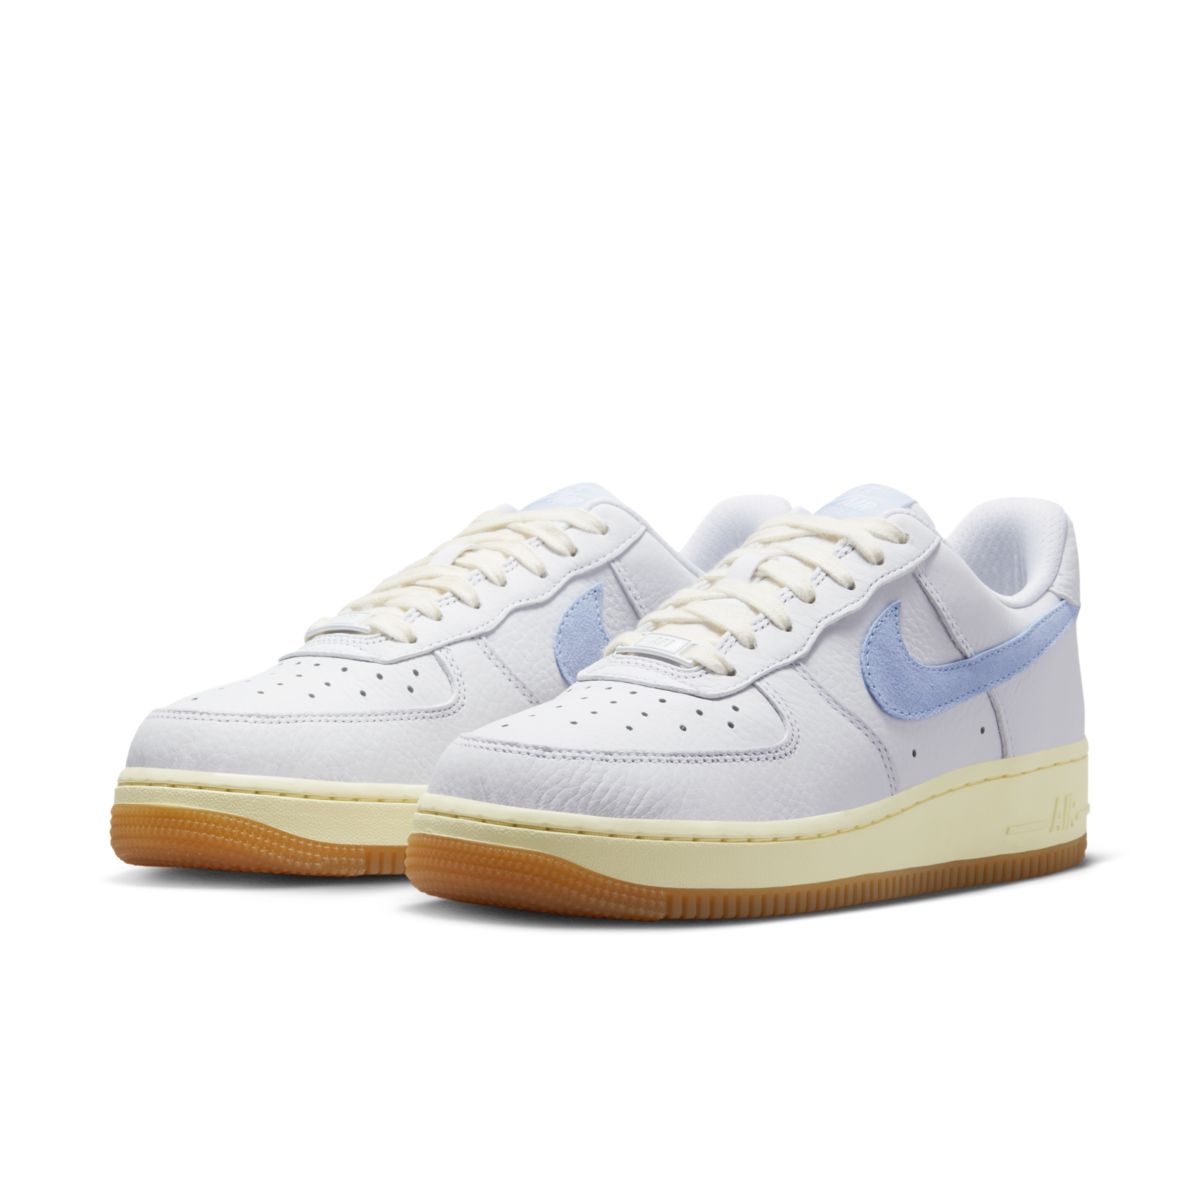 Nike Air Force 1 Low LX White Lilac Blue FD9867-100 4